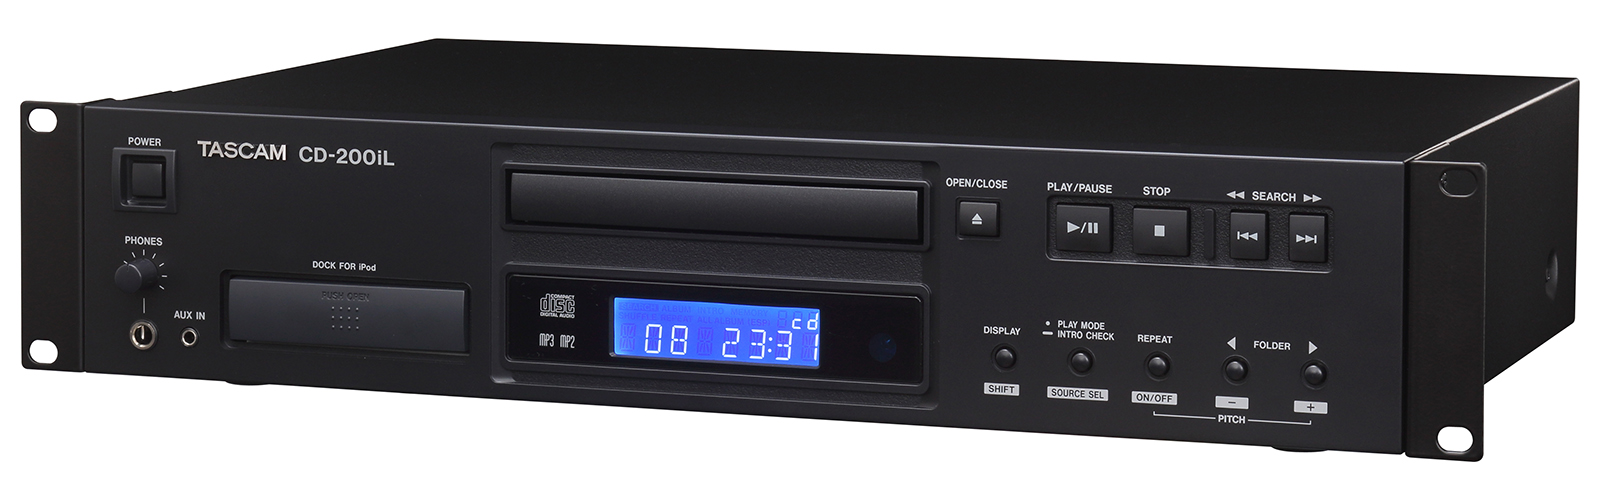 CD-200iL | Professional CD Player & iPod Dock | TASCAM 